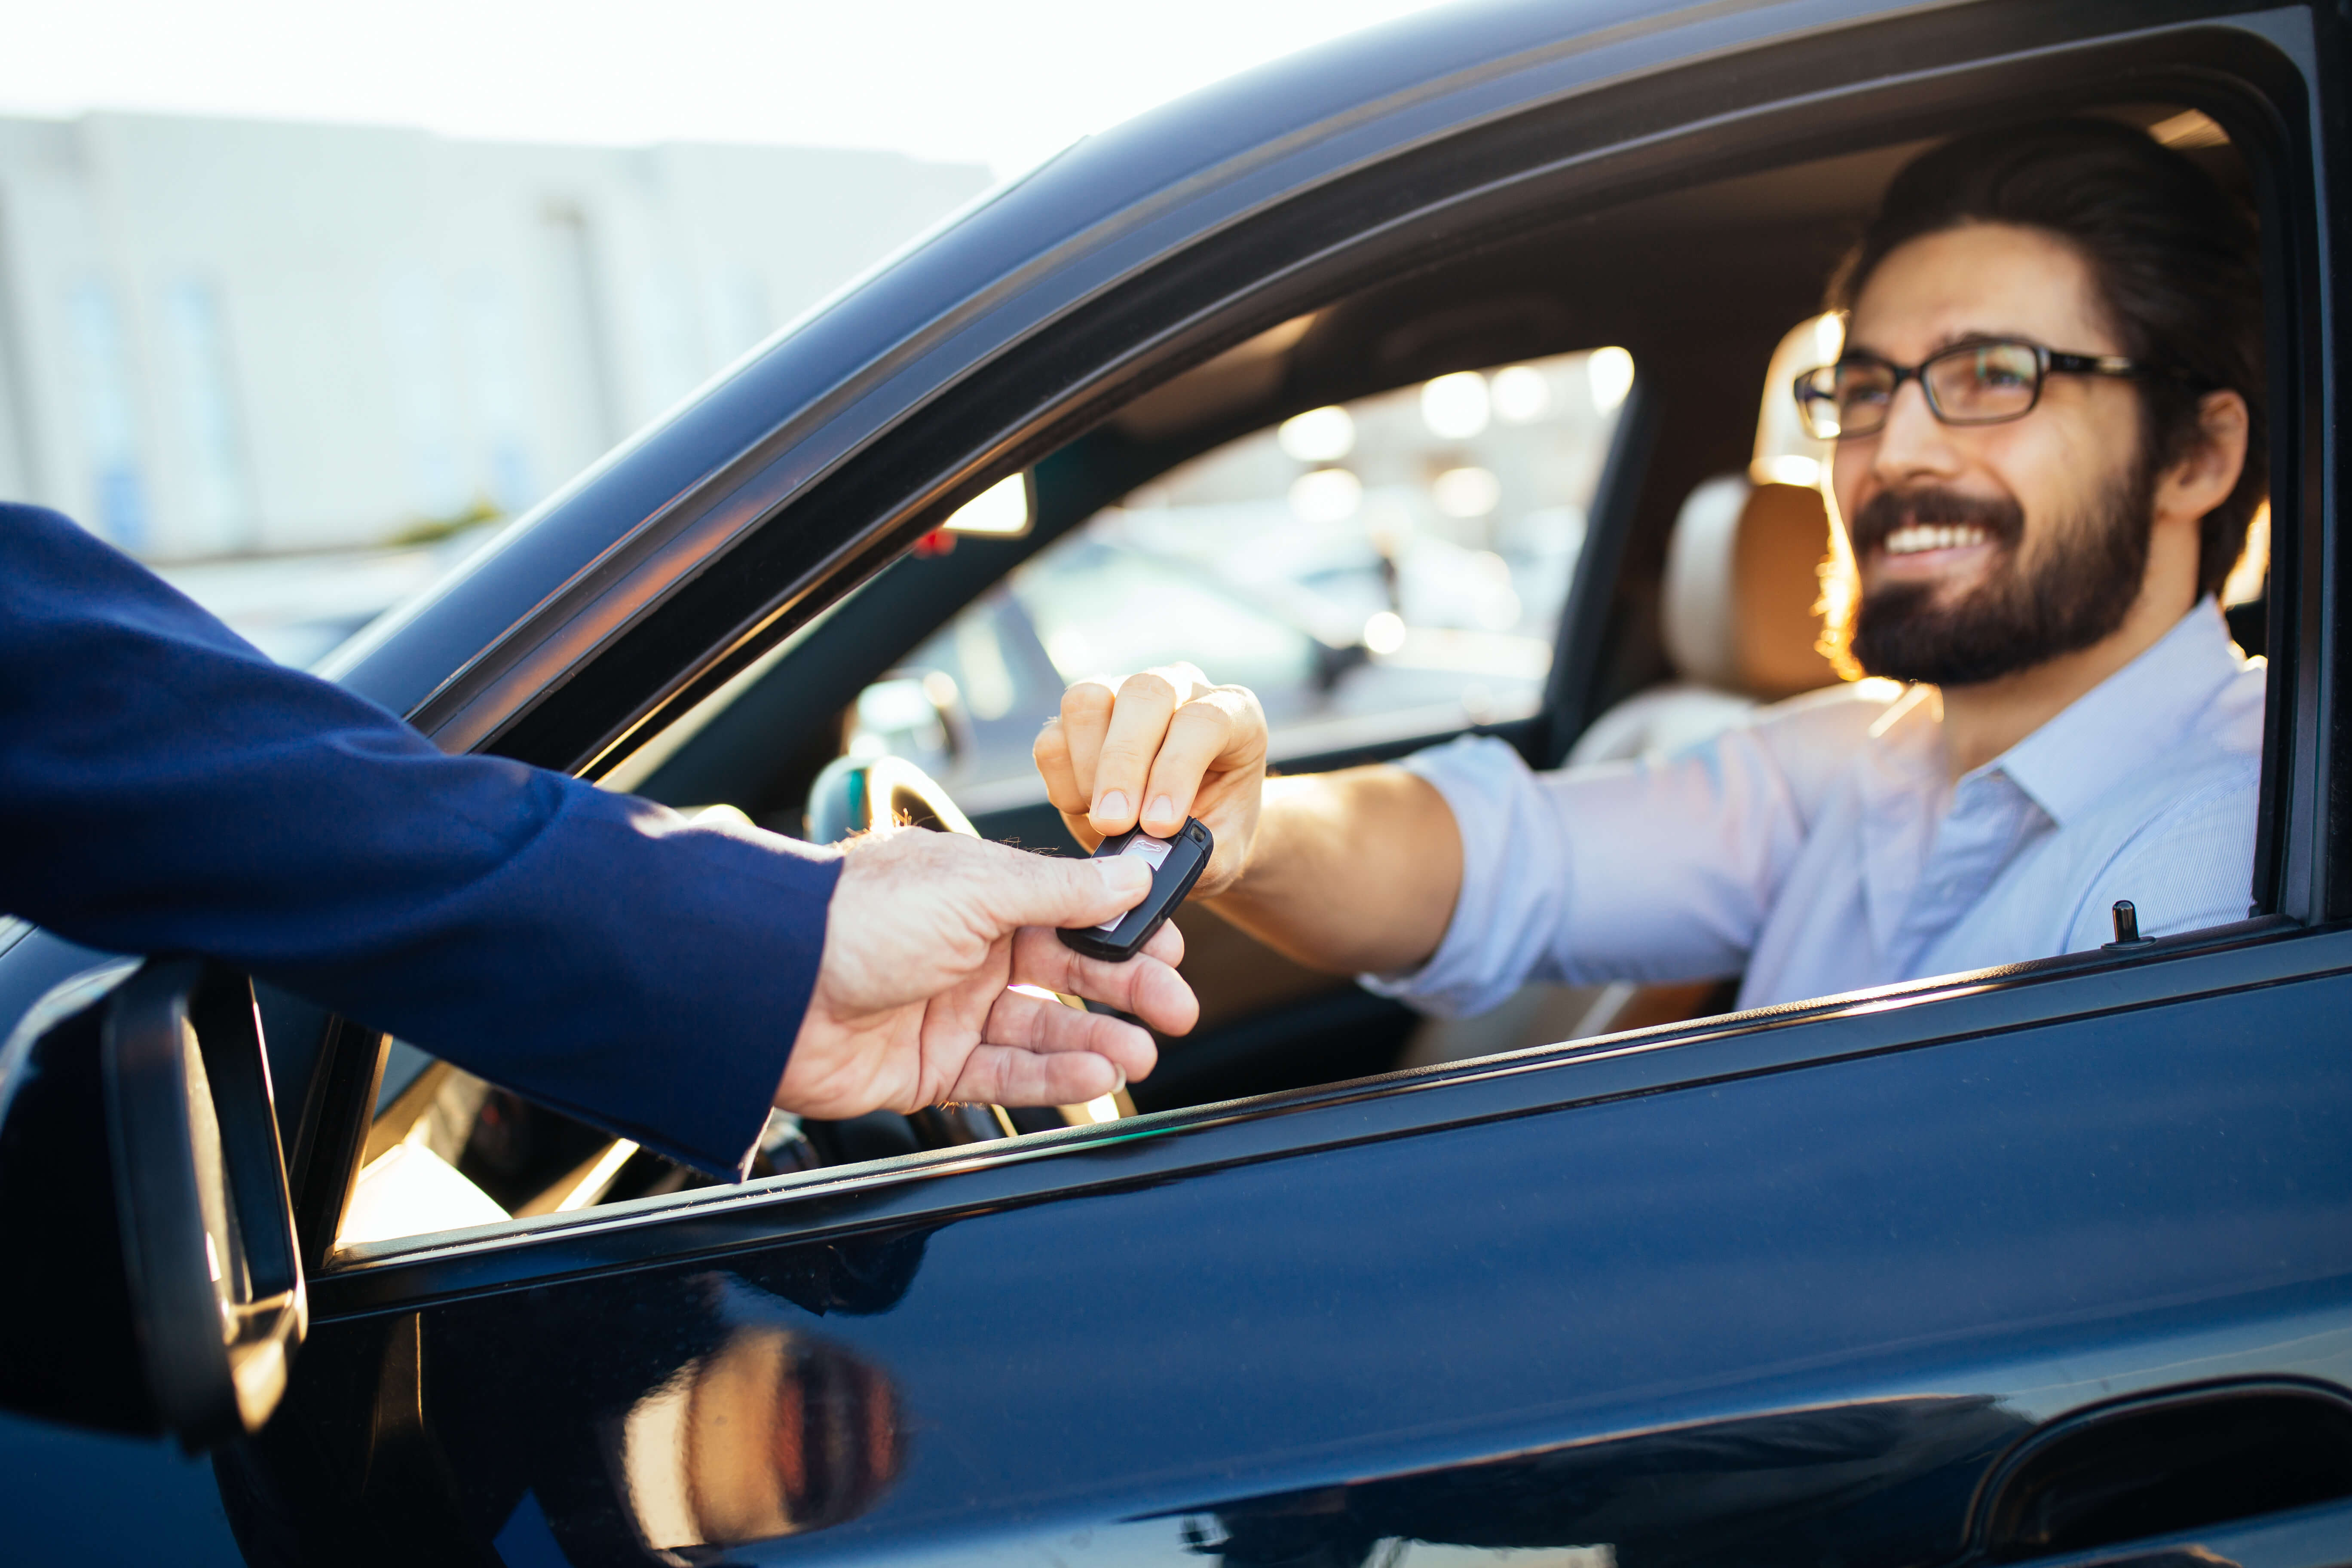 A GoVibe Member receives his car keys from a valet